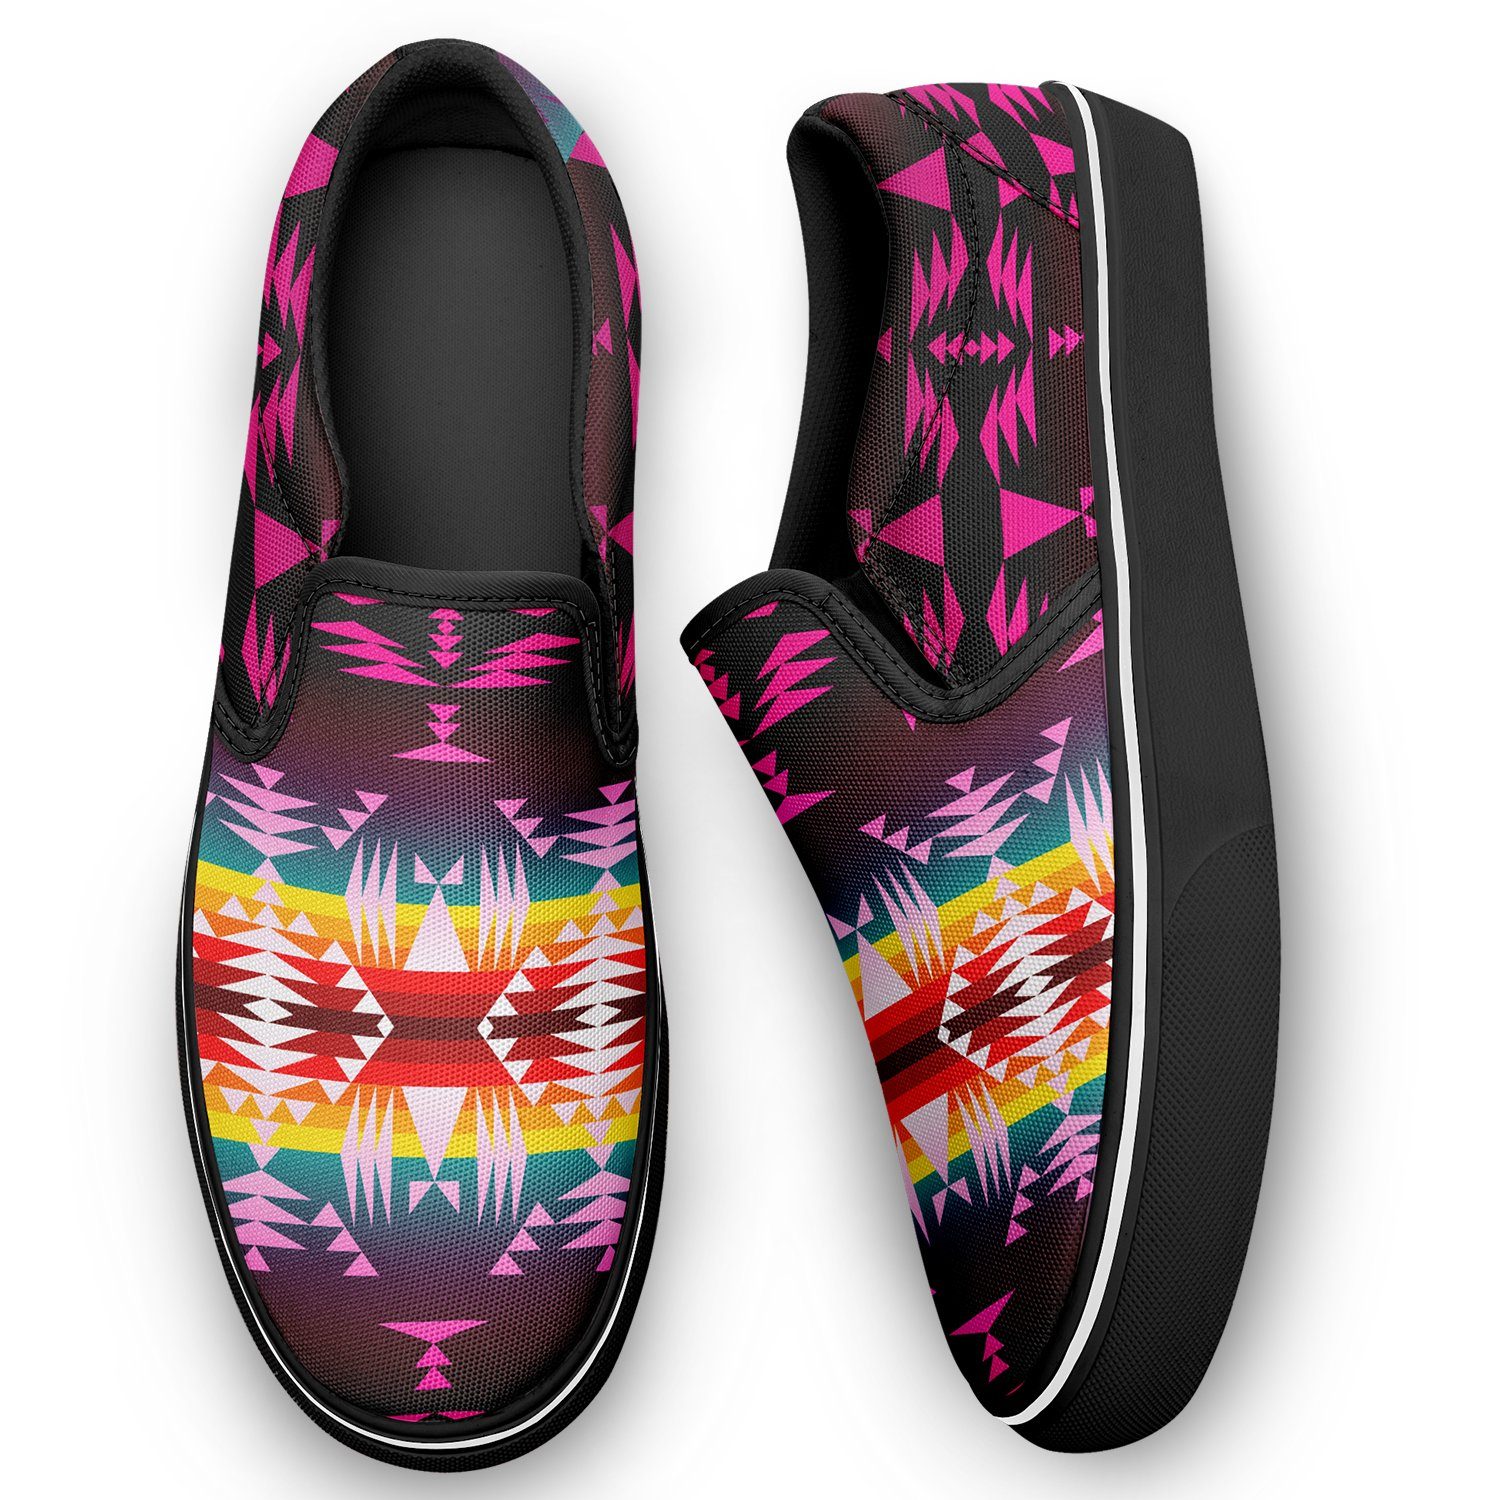 Between the Appalachian Mountains Otoyimm Kid's Canvas Slip On Shoes otoyimm Herman 